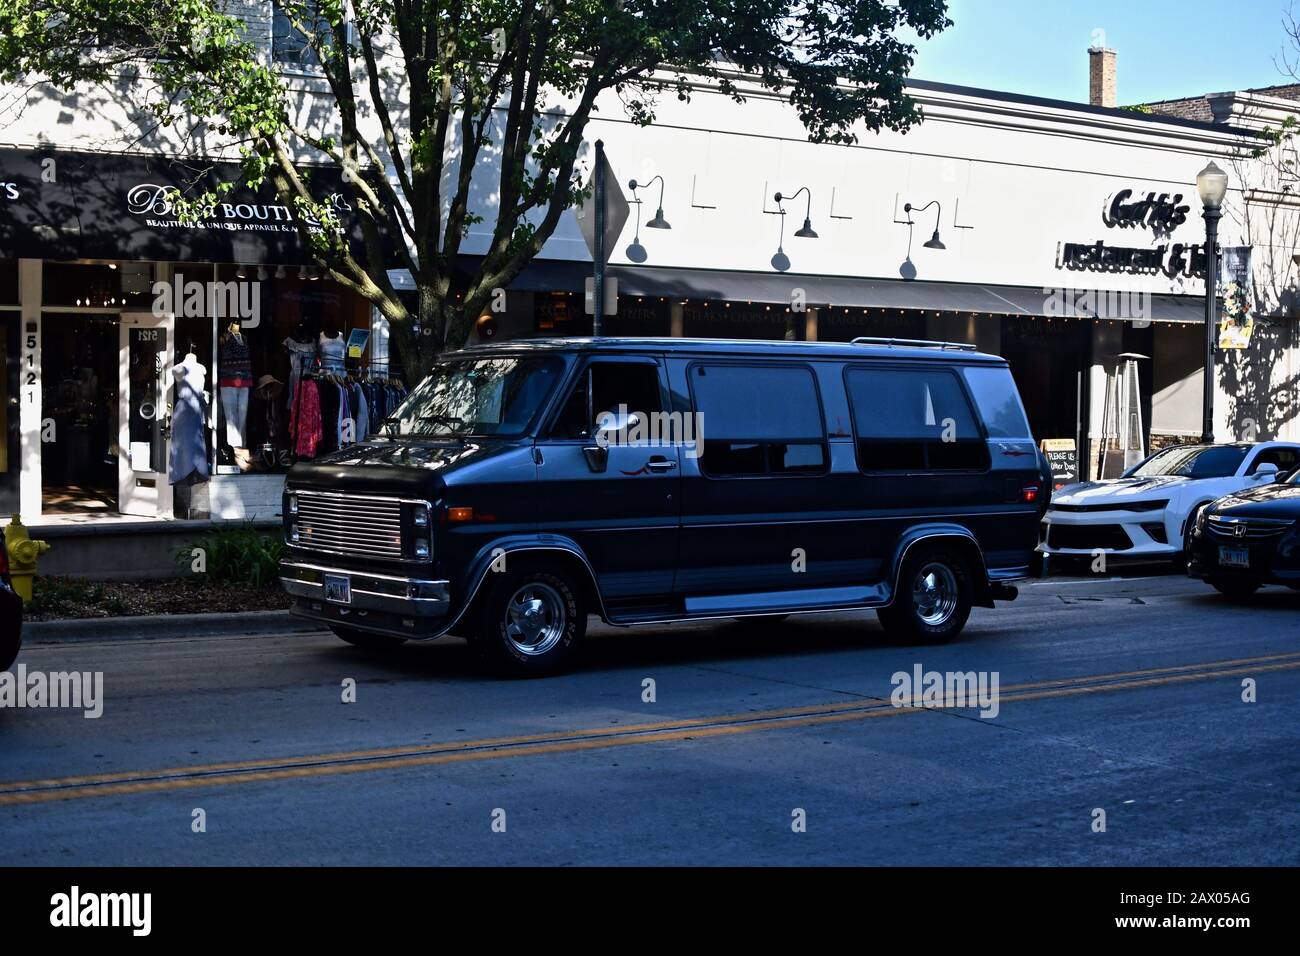 DOWNERS GROVE, UNITED STATES - Jun 07, 2019: A black compact van in a busy road Stock Photo